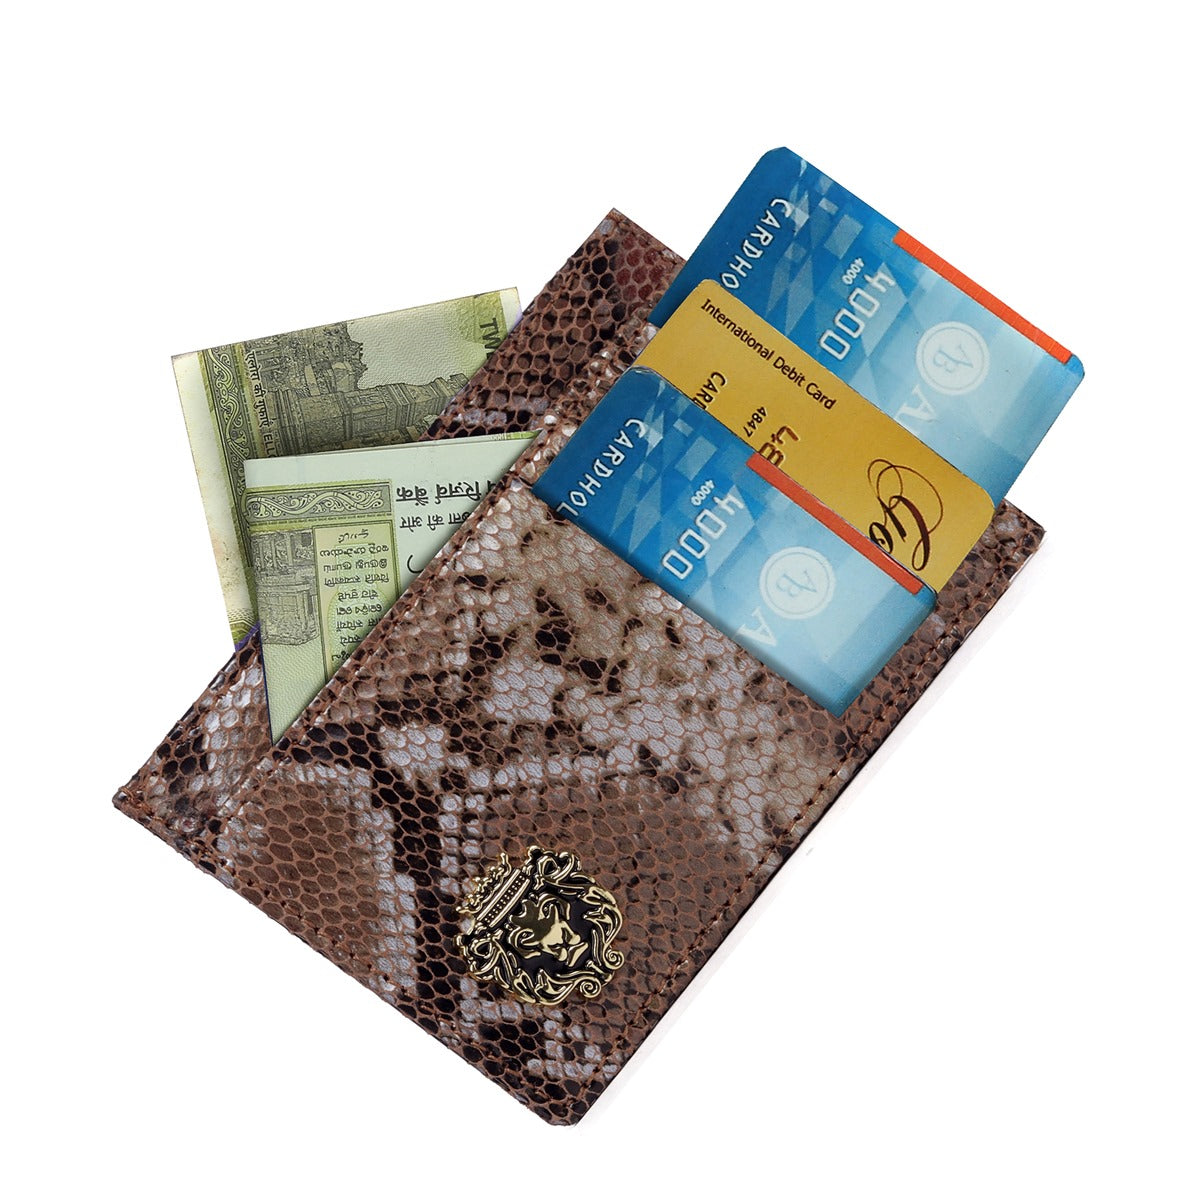 Prolonged Card Holder with Python Snake Skin Textured Leather